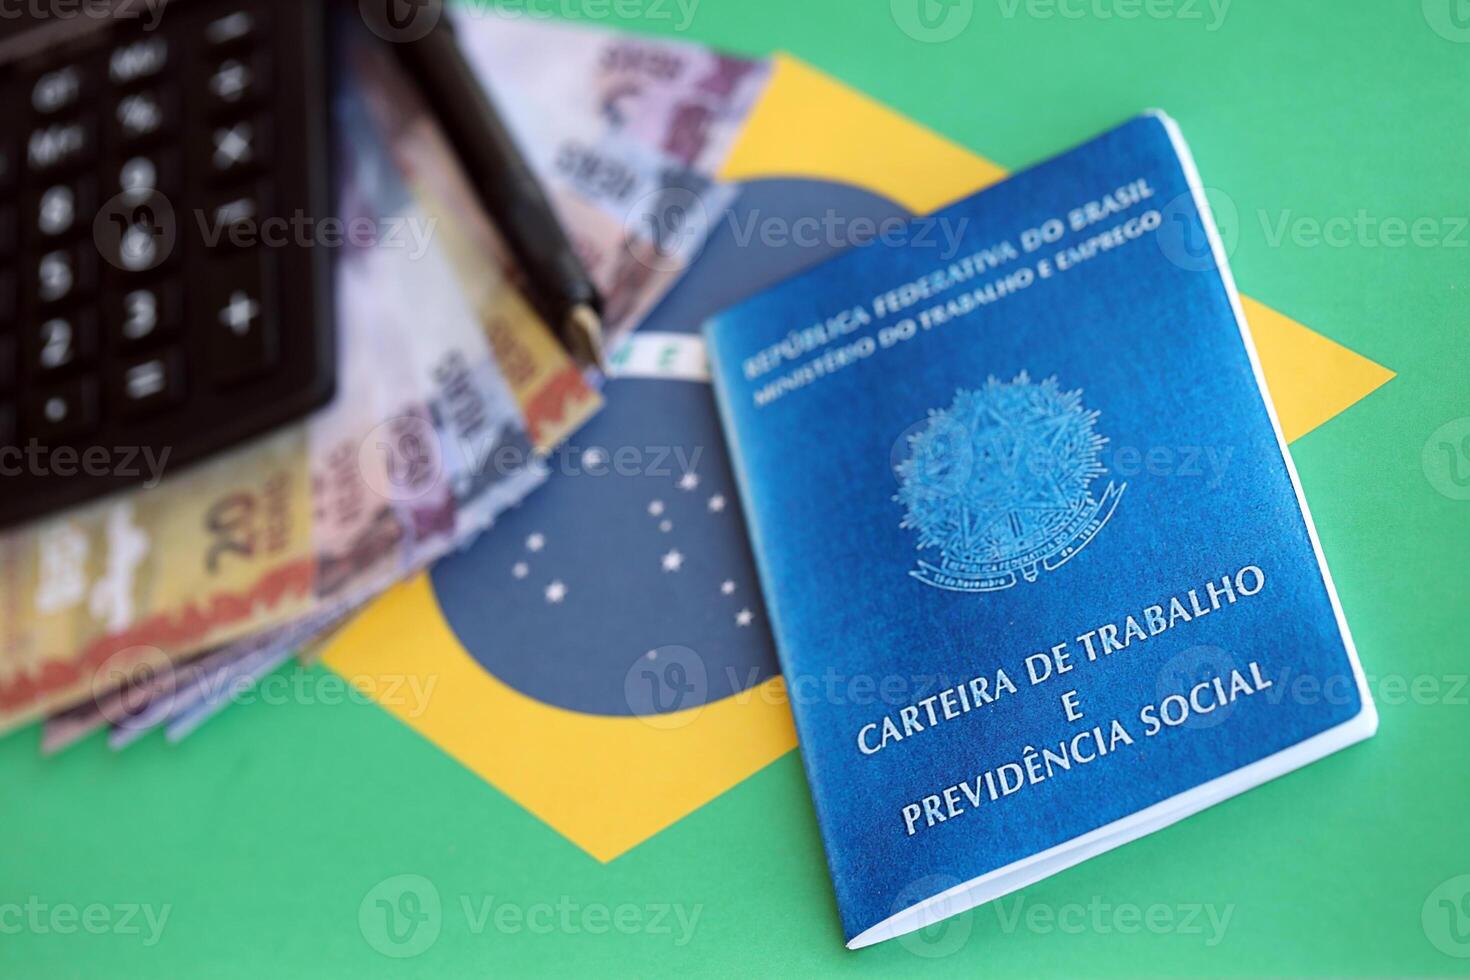 Brazilian work card and social security blue book and reais money bills with calculator and pen on flag of Federative Republic of Brazil photo